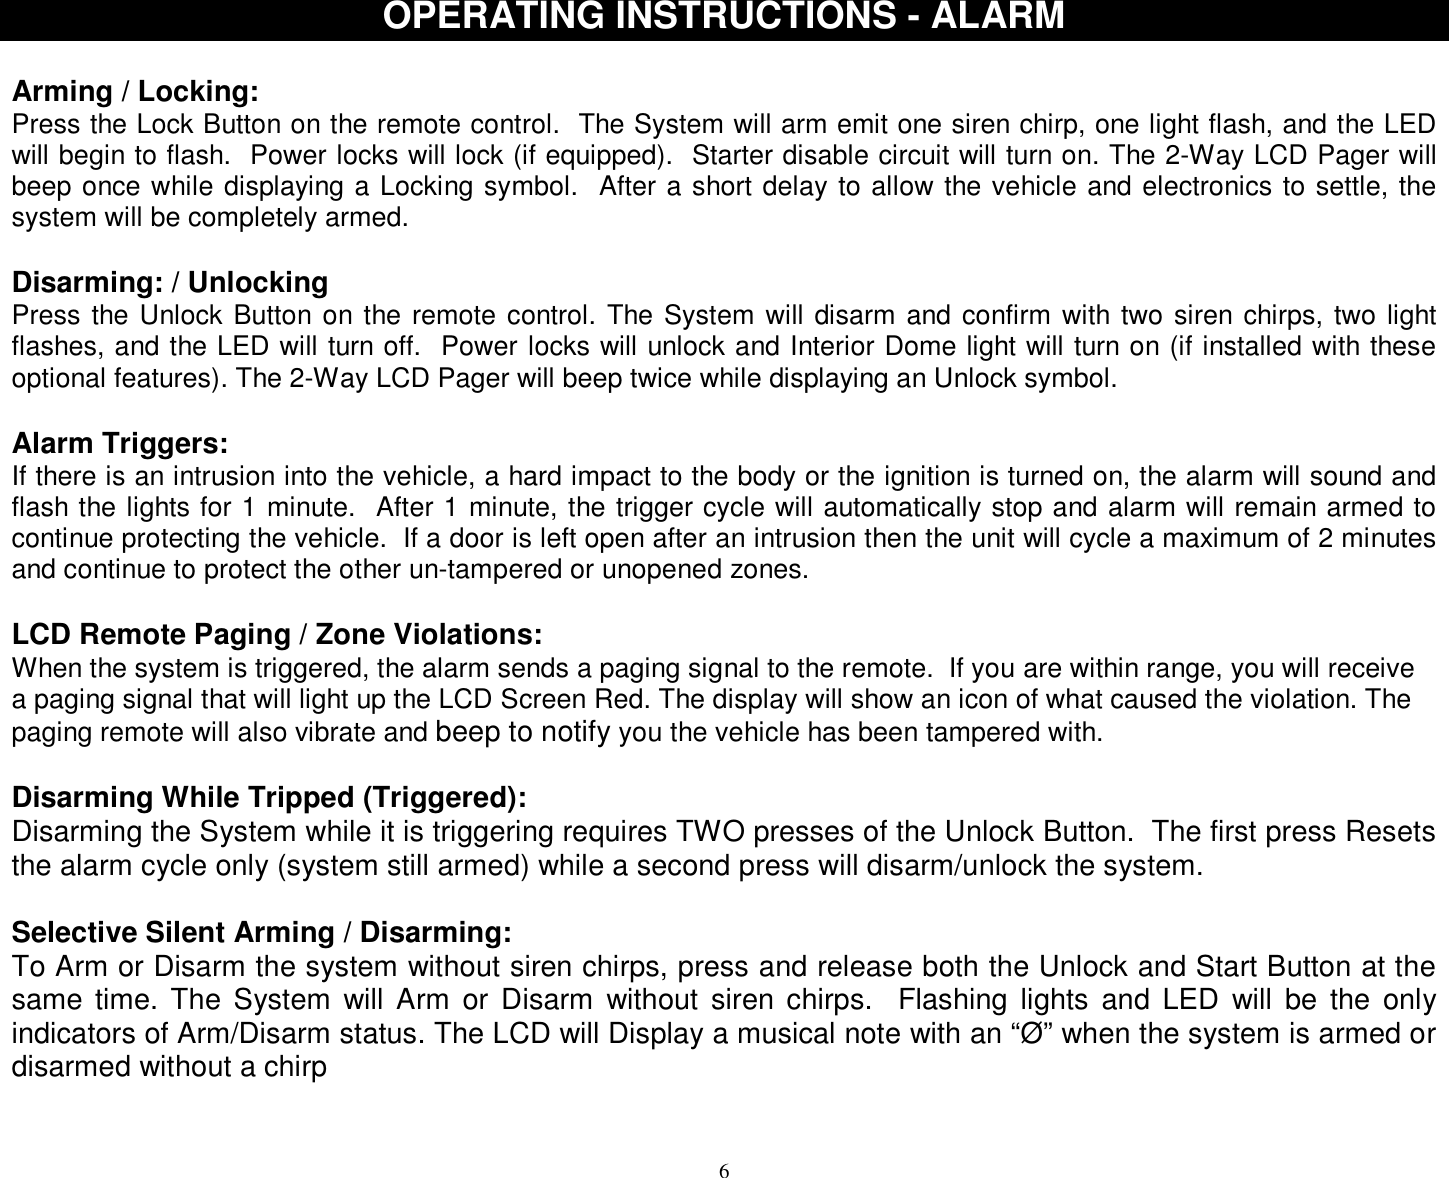  6OPERATING INSTRUCTIONS - ALARM  Arming / Locking: Press the Lock Button on the remote control.  The System will arm emit one siren chirp, one light flash, and the LED will begin to flash.  Power locks will lock (if equipped).  Starter disable circuit will turn on. The 2-Way LCD Pager will beep once while displaying a Locking symbol.  After a short delay to allow the vehicle and electronics to settle, the system will be completely armed.  Disarming: / Unlocking  Press the Unlock Button on the remote control. The System will disarm and confirm with two siren chirps, two light flashes, and the LED will turn off.  Power locks will unlock and Interior Dome light will turn on (if installed with these optional features). The 2-Way LCD Pager will beep twice while displaying an Unlock symbol.  Alarm Triggers: If there is an intrusion into the vehicle, a hard impact to the body or the ignition is turned on, the alarm will sound and flash the lights for 1 minute.  After 1 minute, the trigger cycle will automatically stop and alarm will remain armed to continue protecting the vehicle.  If a door is left open after an intrusion then the unit will cycle a maximum of 2 minutes and continue to protect the other un-tampered or unopened zones.  LCD Remote Paging / Zone Violations: When the system is triggered, the alarm sends a paging signal to the remote.  If you are within range, you will receive a paging signal that will light up the LCD Screen Red. The display will show an icon of what caused the violation. The paging remote will also vibrate and beep to notify you the vehicle has been tampered with.   Disarming While Tripped (Triggered): Disarming the System while it is triggering requires TWO presses of the Unlock Button.  The first press Resets the alarm cycle only (system still armed) while a second press will disarm/unlock the system.  Selective Silent Arming / Disarming: To Arm or Disarm the system without siren chirps, press and release both the Unlock and Start Button at the same time. The System will Arm or Disarm without siren chirps.  Flashing lights and LED will be the only indicators of Arm/Disarm status. The LCD will Display a musical note with an “Ø” when the system is armed or disarmed without a chirp                                              